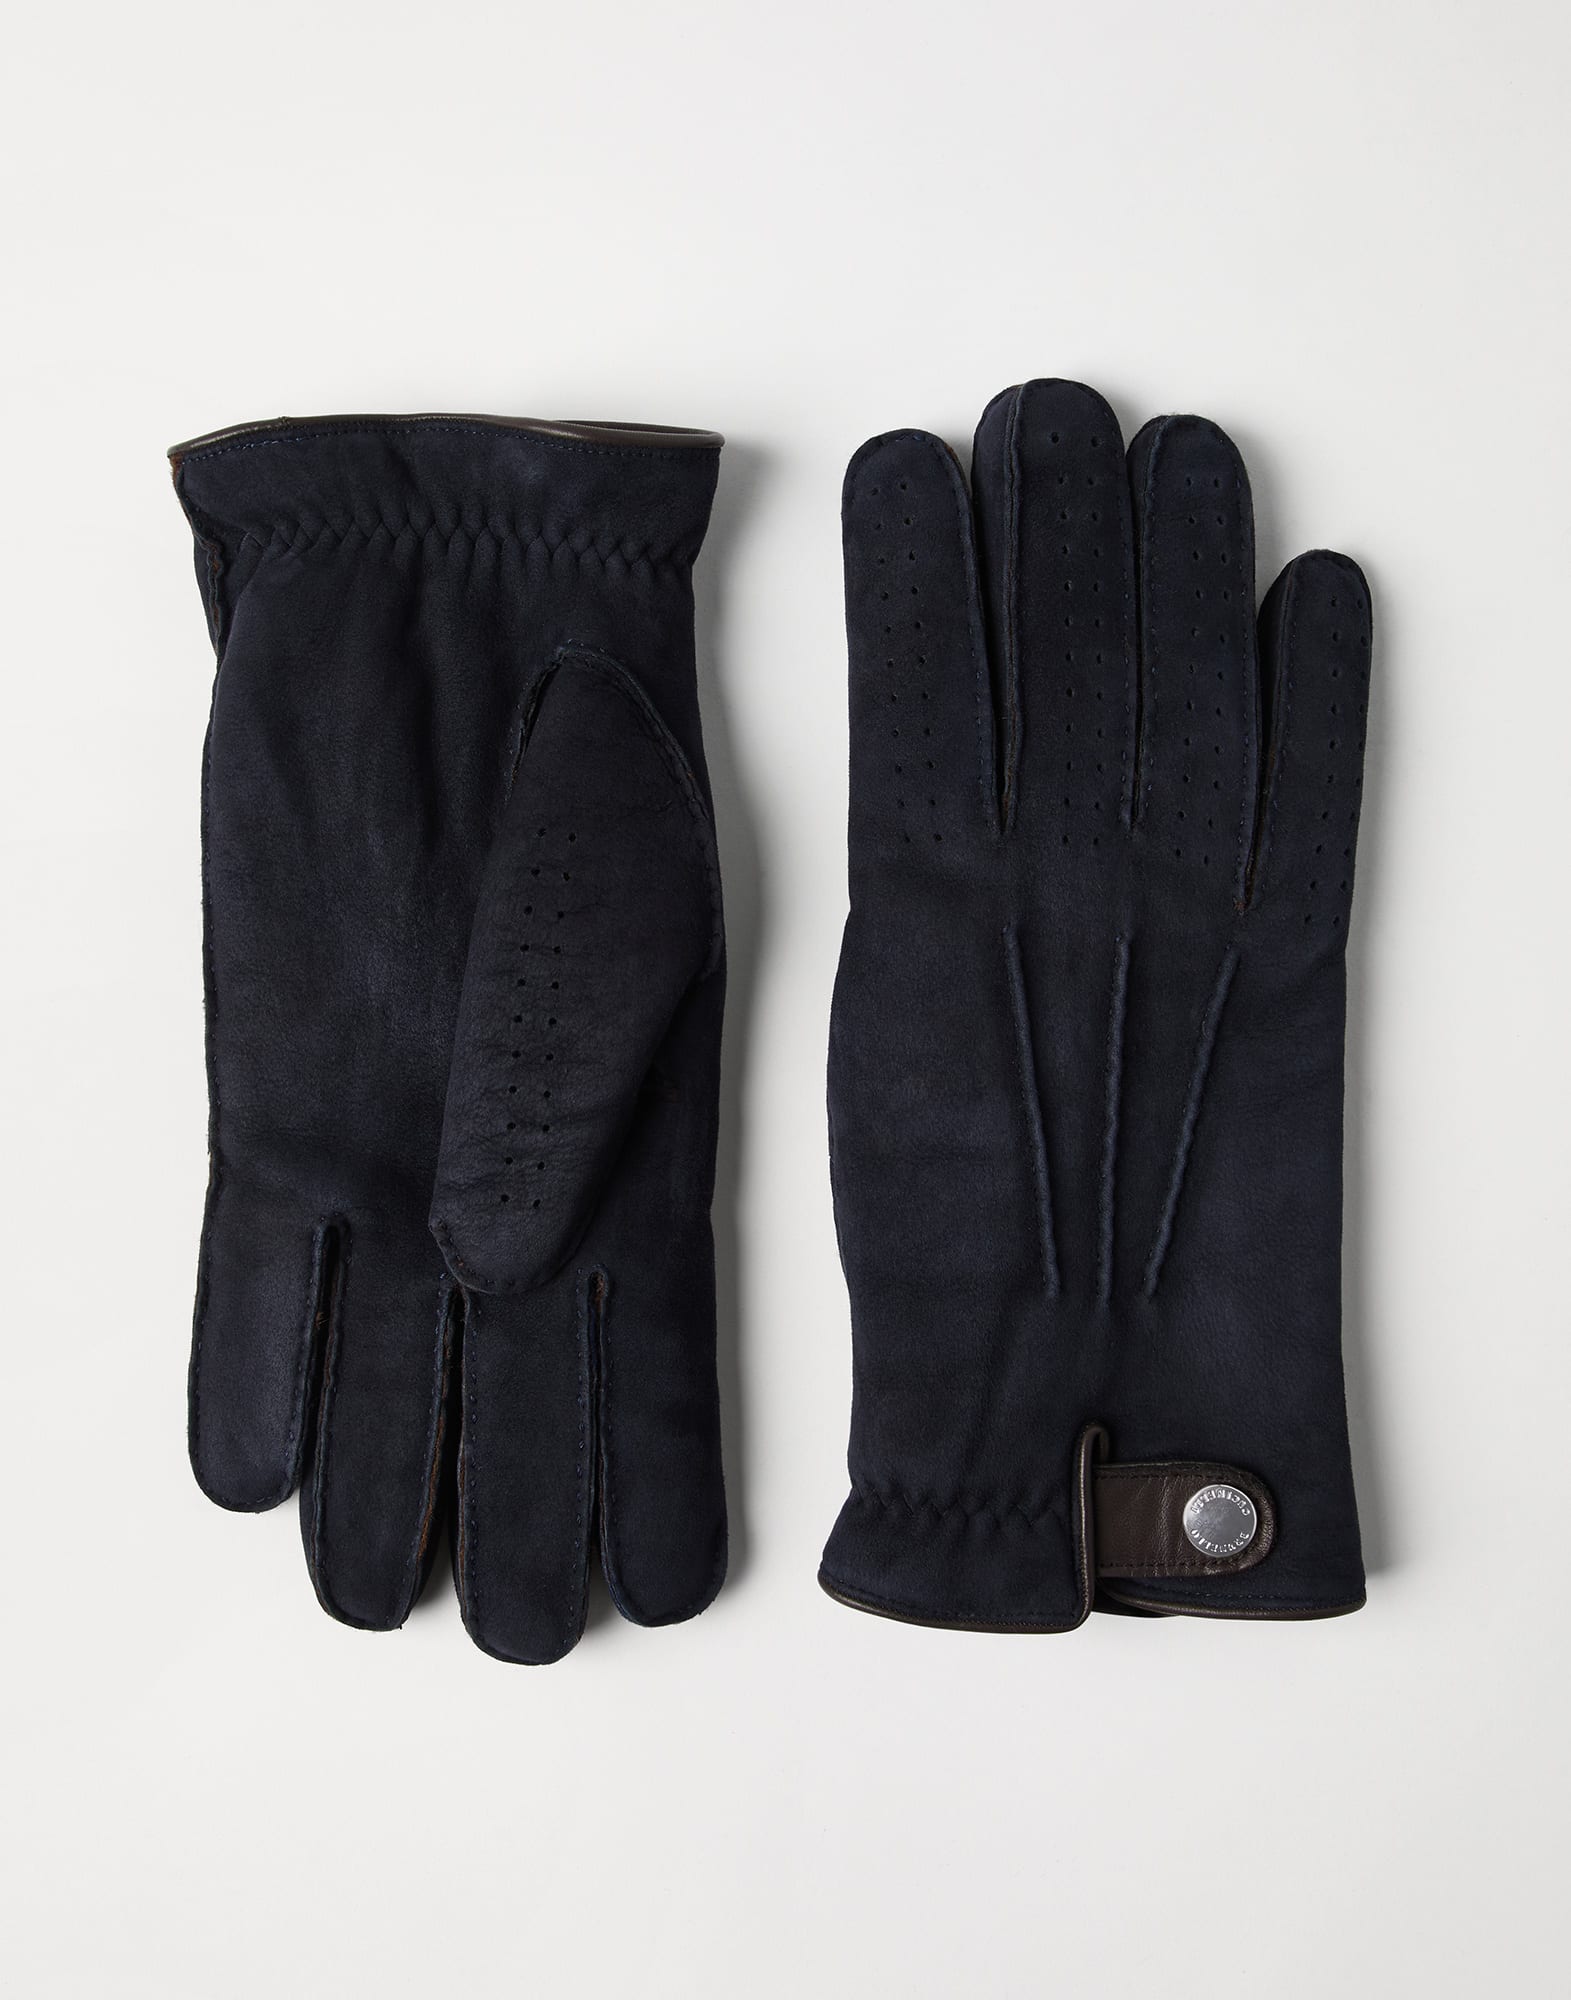 Shearling gloves